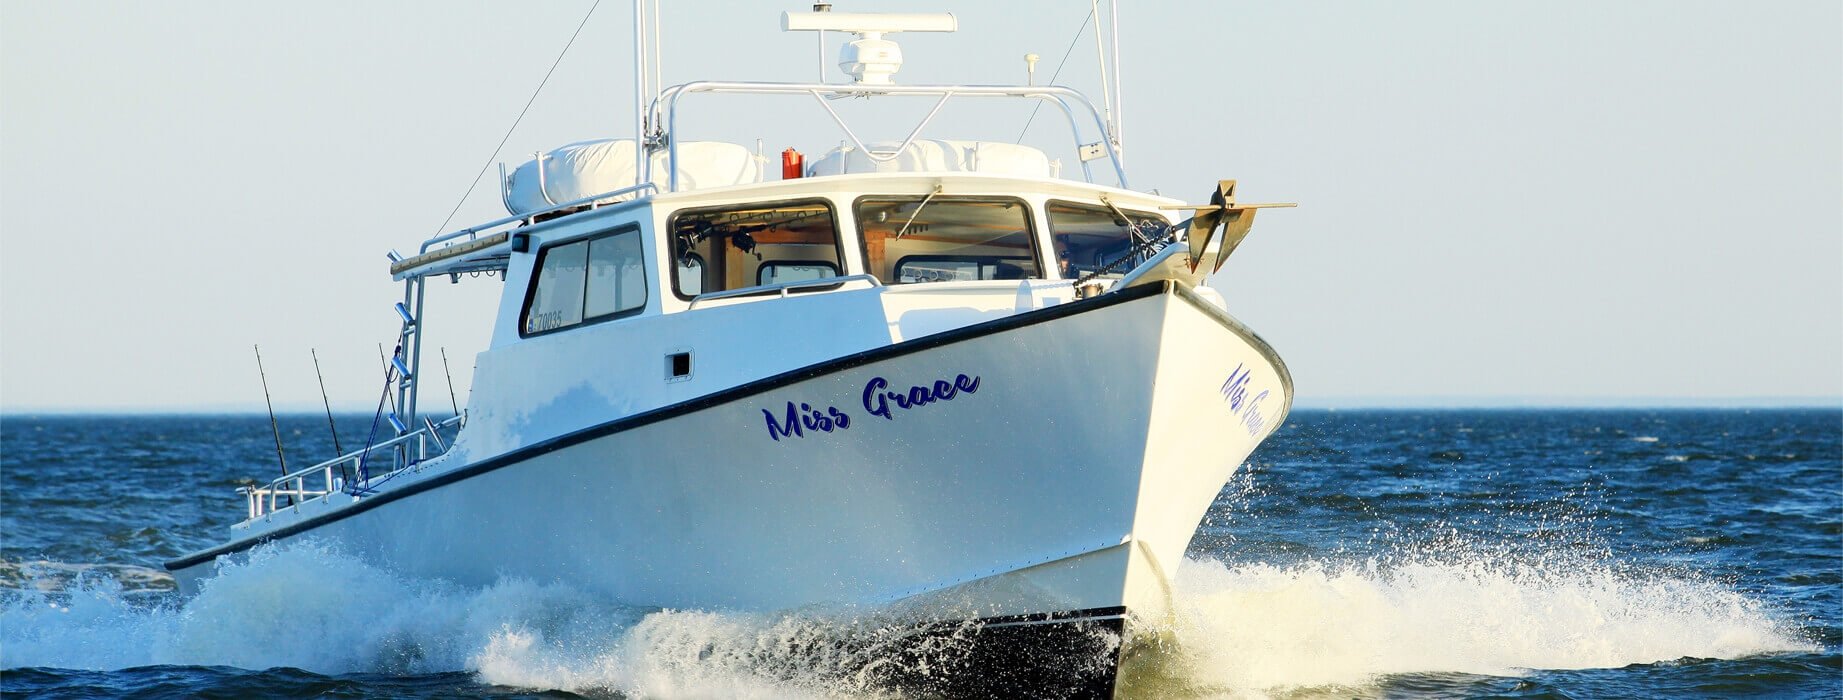 Miss Grace Charters Chesapeake Bay Fishing & Cruising, Annapolis, Deale and Solomon's Island Maryland